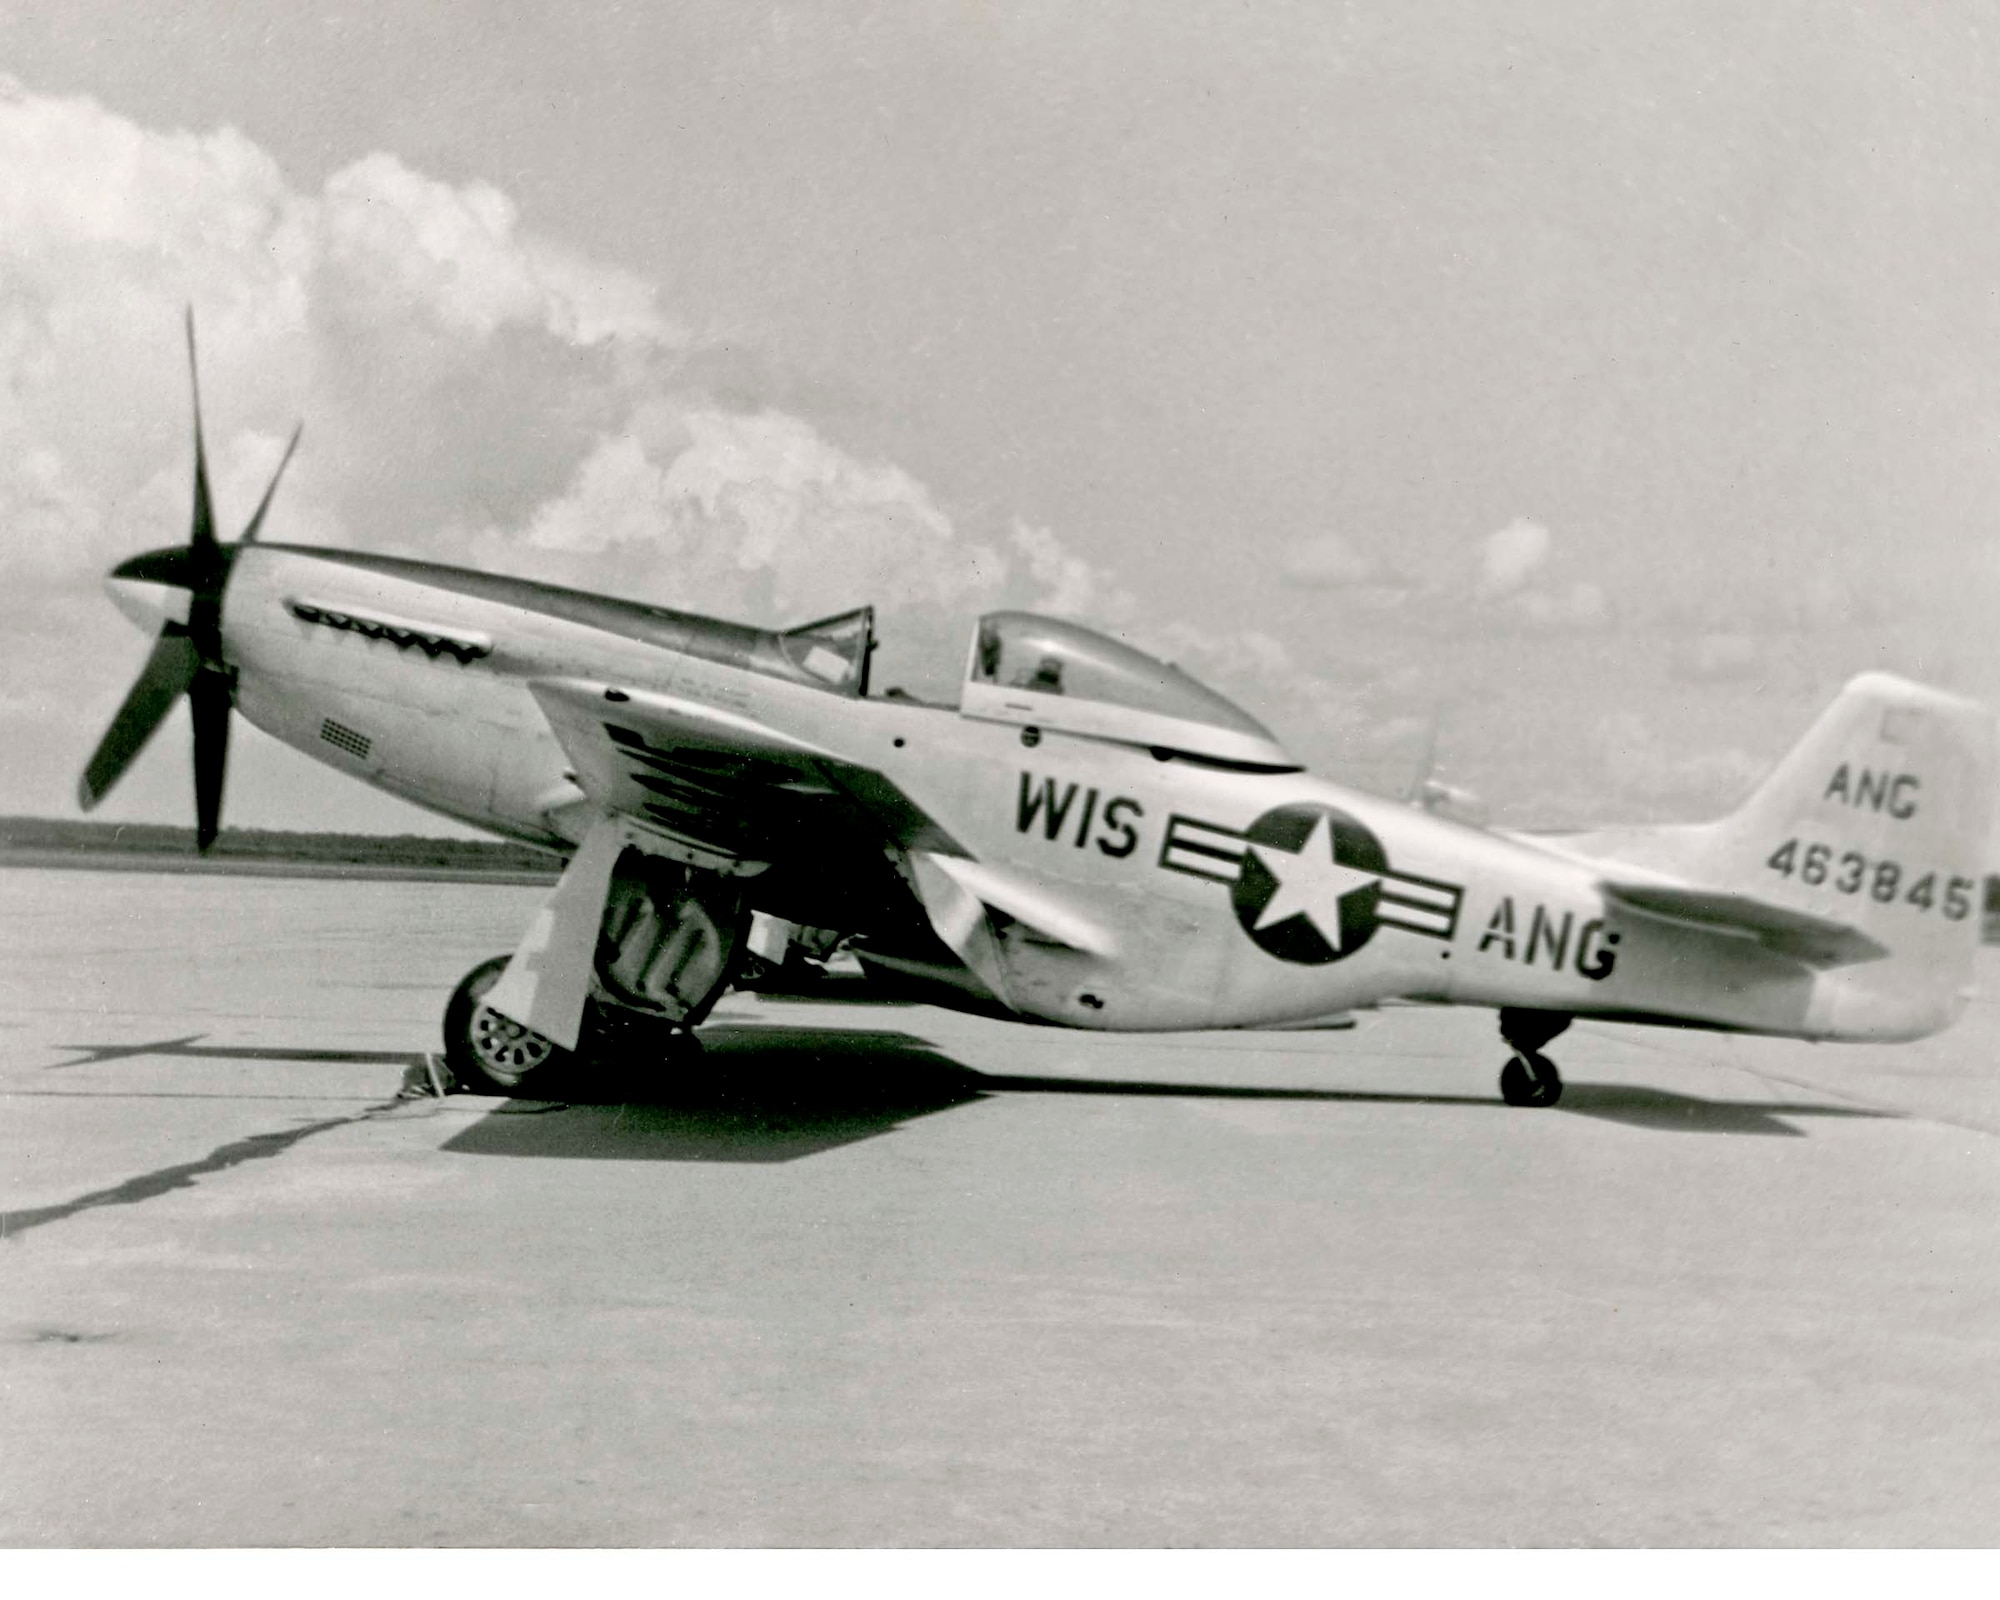 North American P-51D "Mustang" fighter. Flown from 1947-49, and from late 1952 to mid-1953.